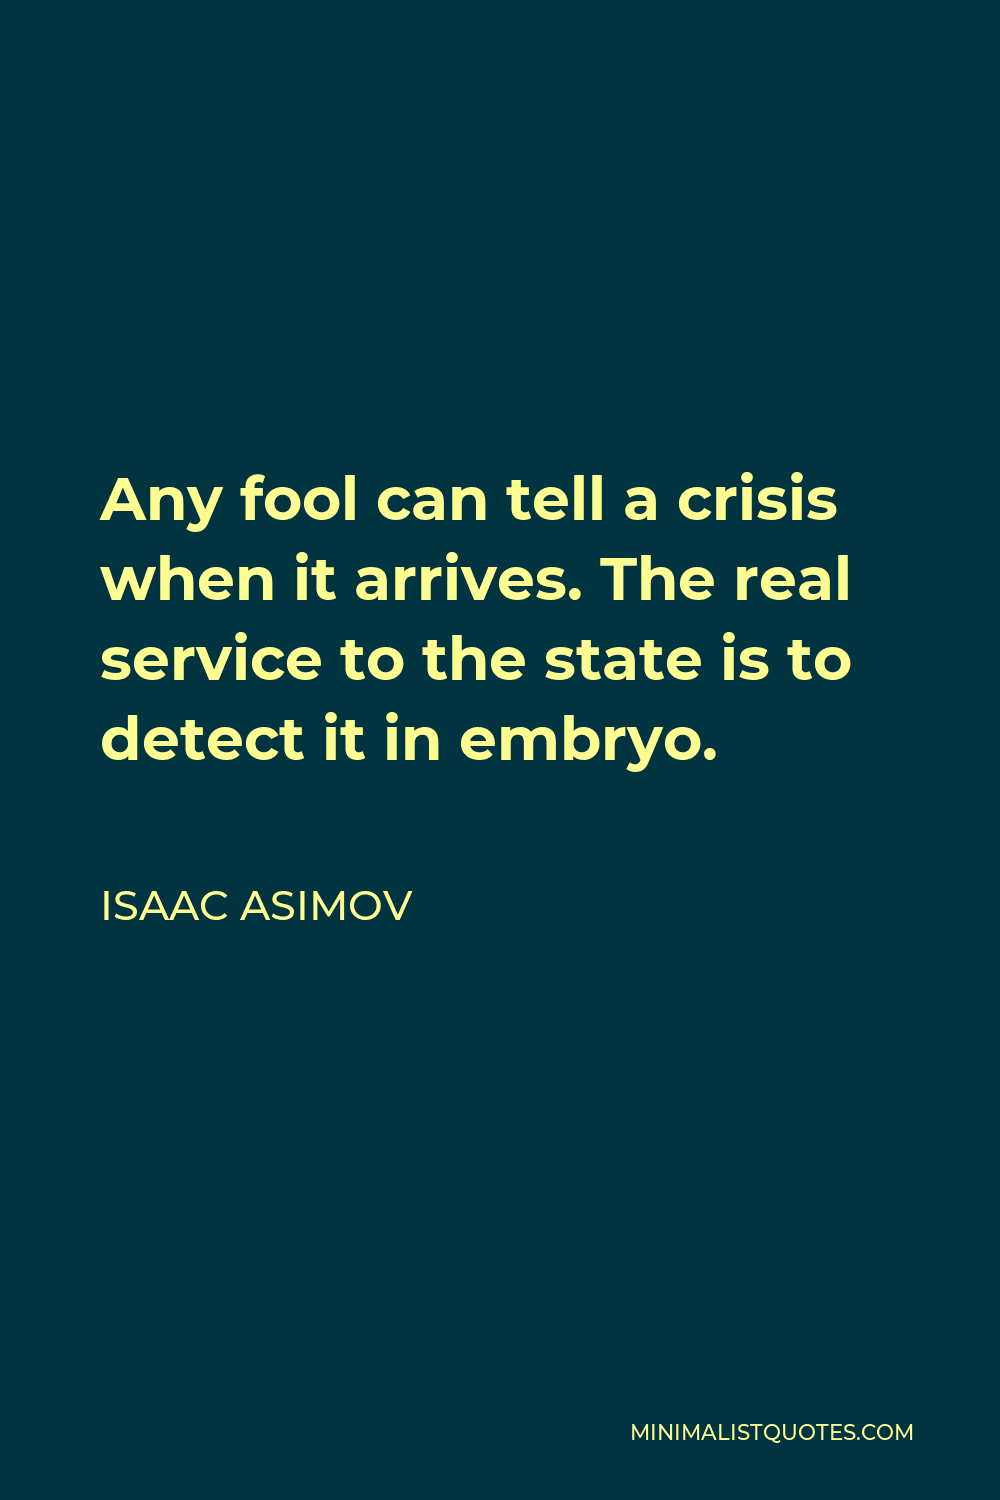 Isaac Asimov Quote - Any fool can tell a crisis when it arrives. The real service to the state is to detect it in embryo.